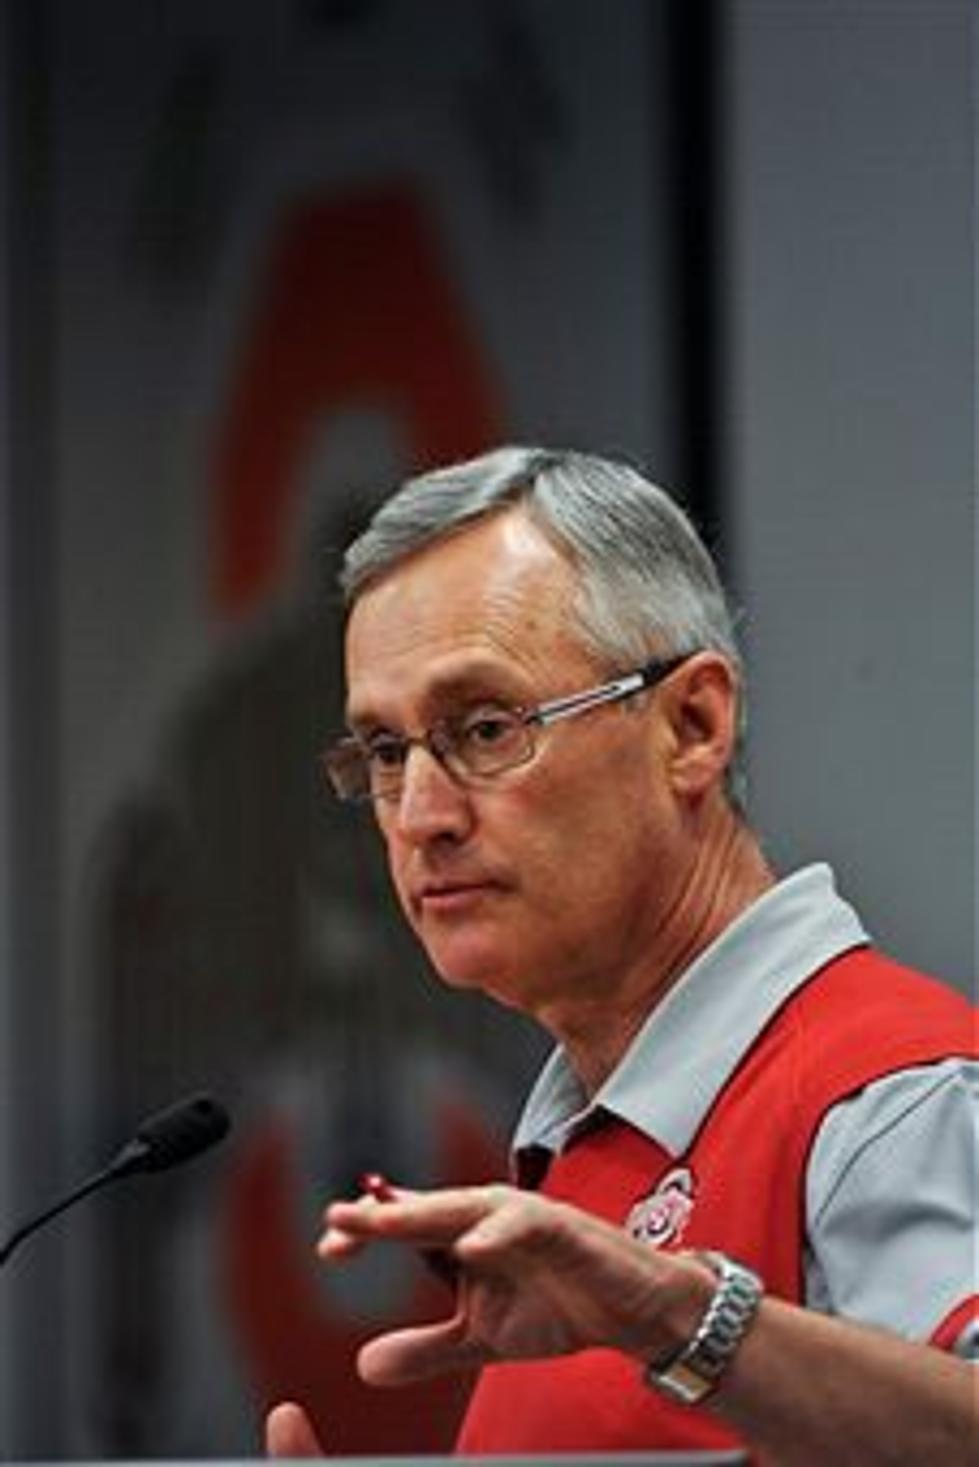 NCAA notice of allegations specifically names Coach Jim Tressel